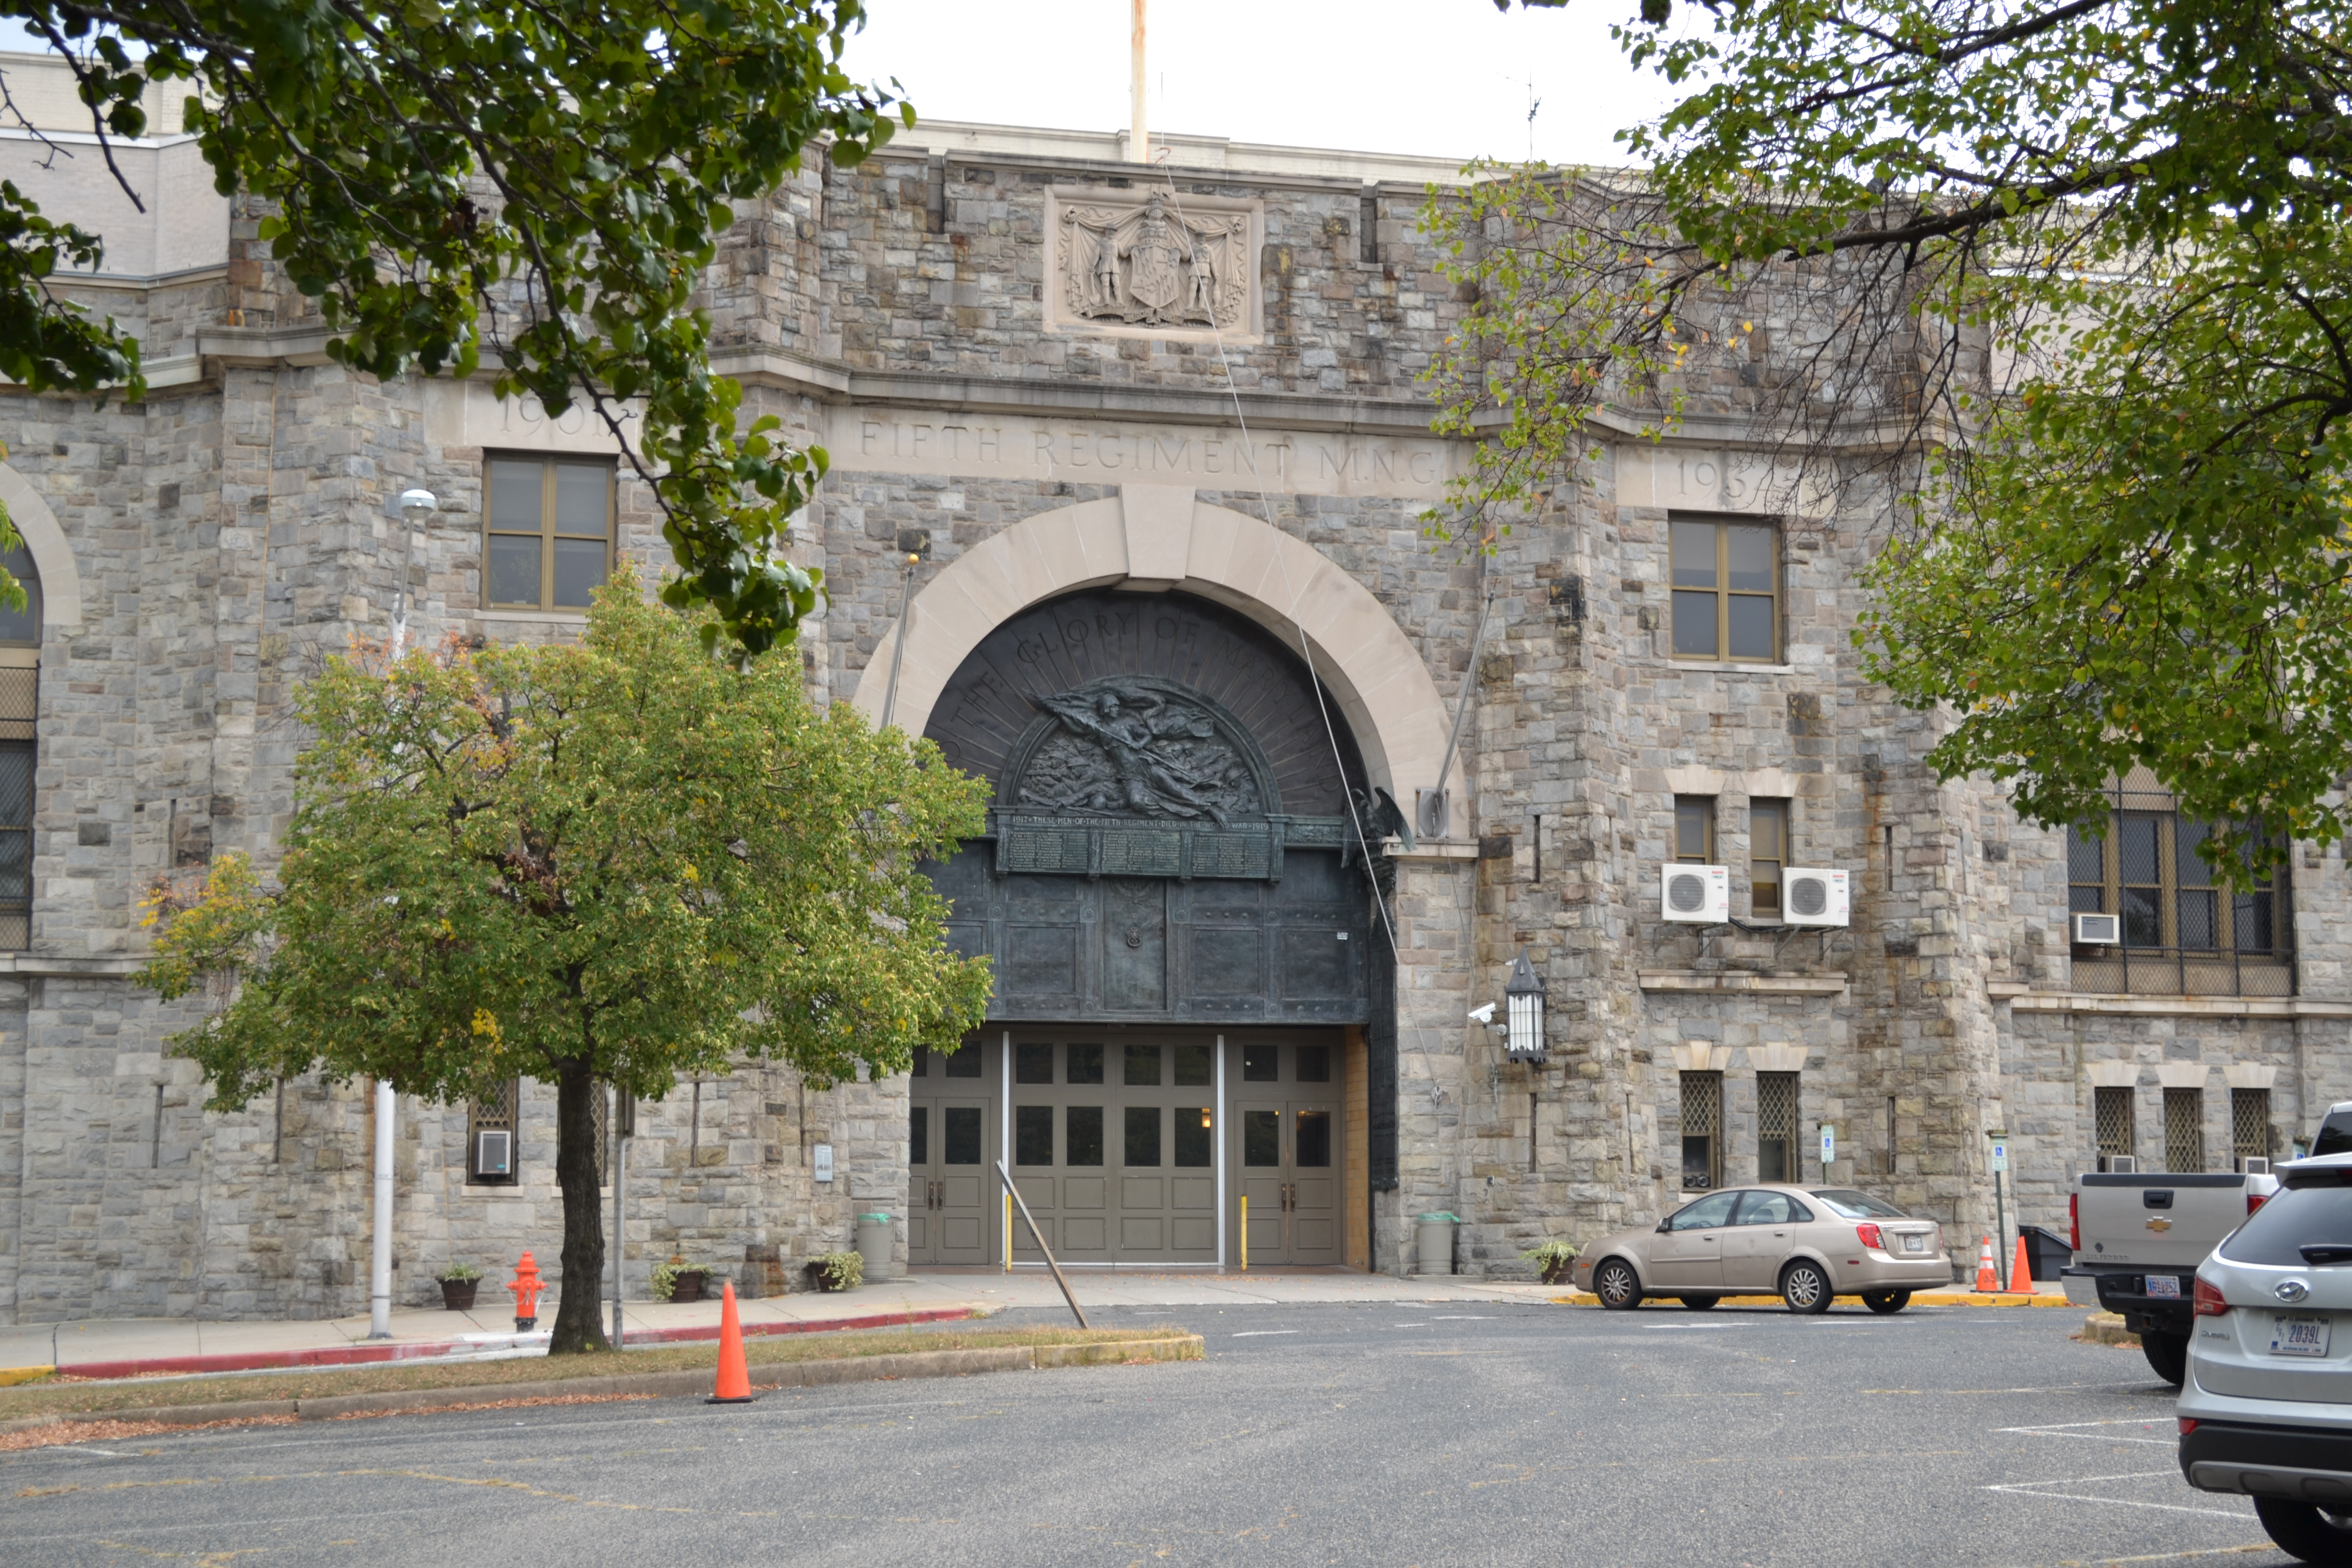 Fifth Regiment Armory, Baltimore, MD